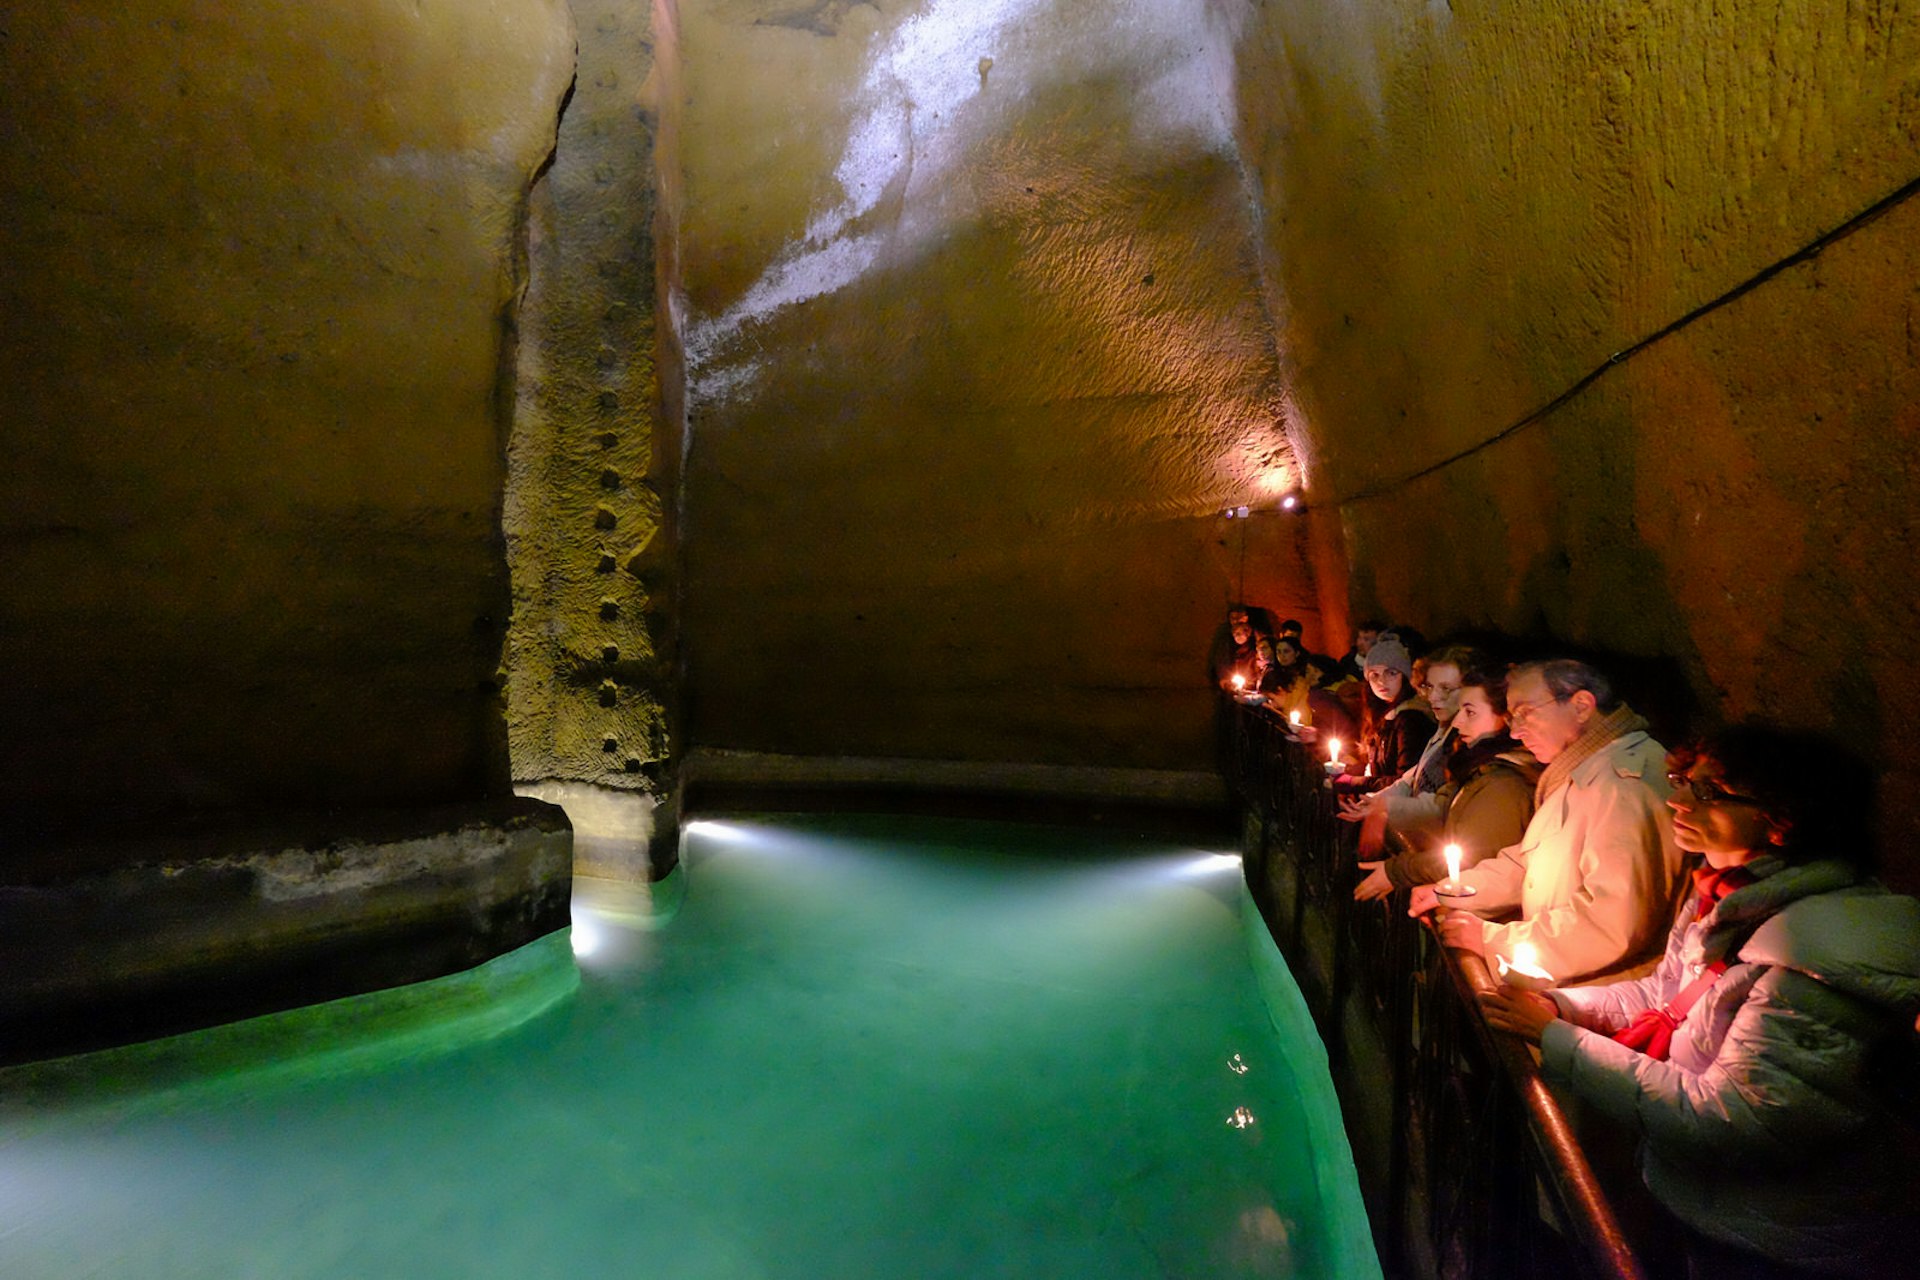 Discovering an ancient water cistern by candlelight